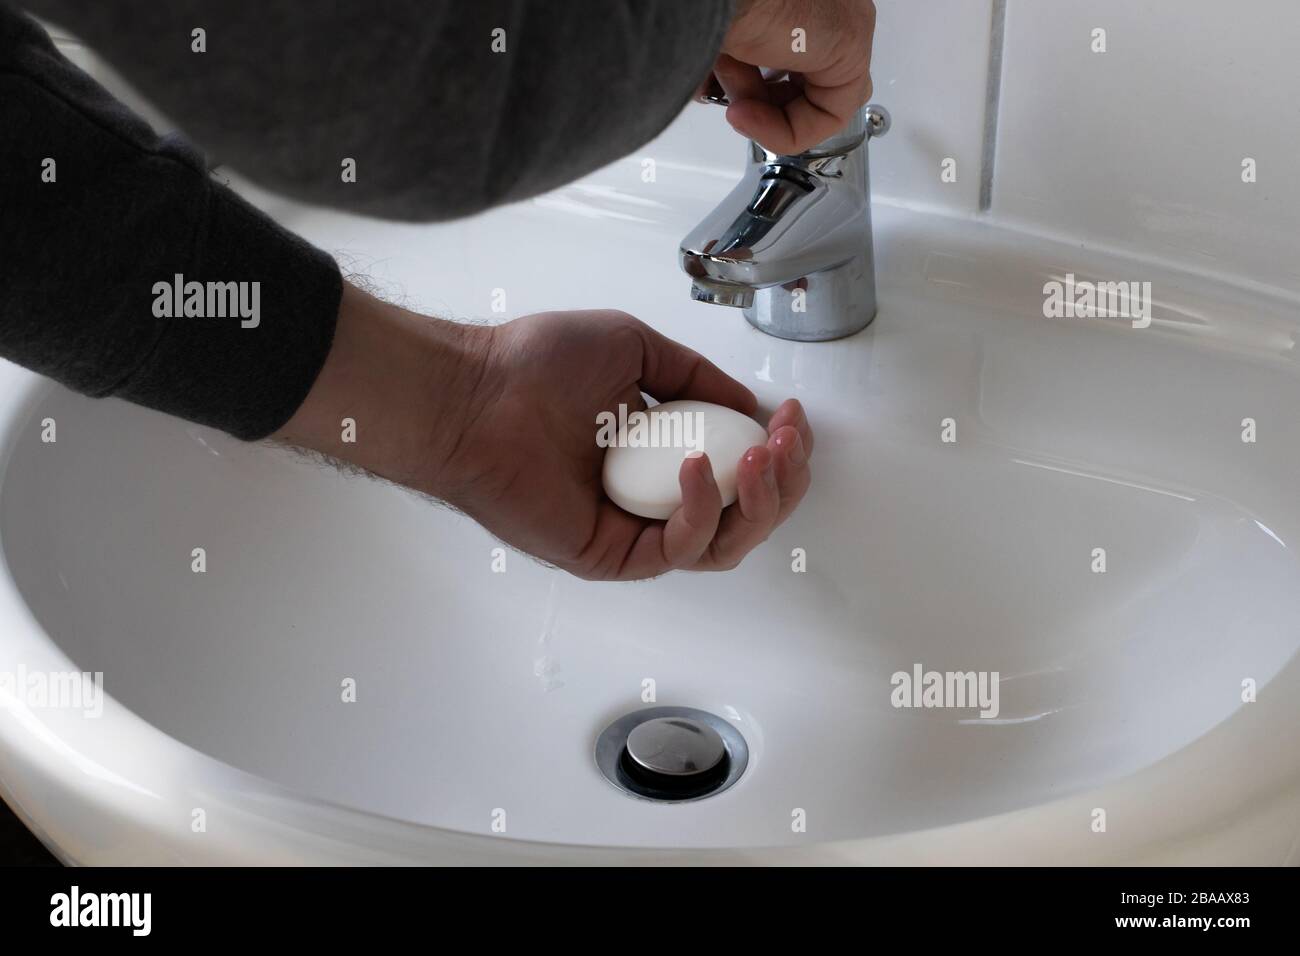 Detail of a Young male washing his Hands with Soap under running water in order to reduce infection Risk during corona Virus pandemic Stock Photo